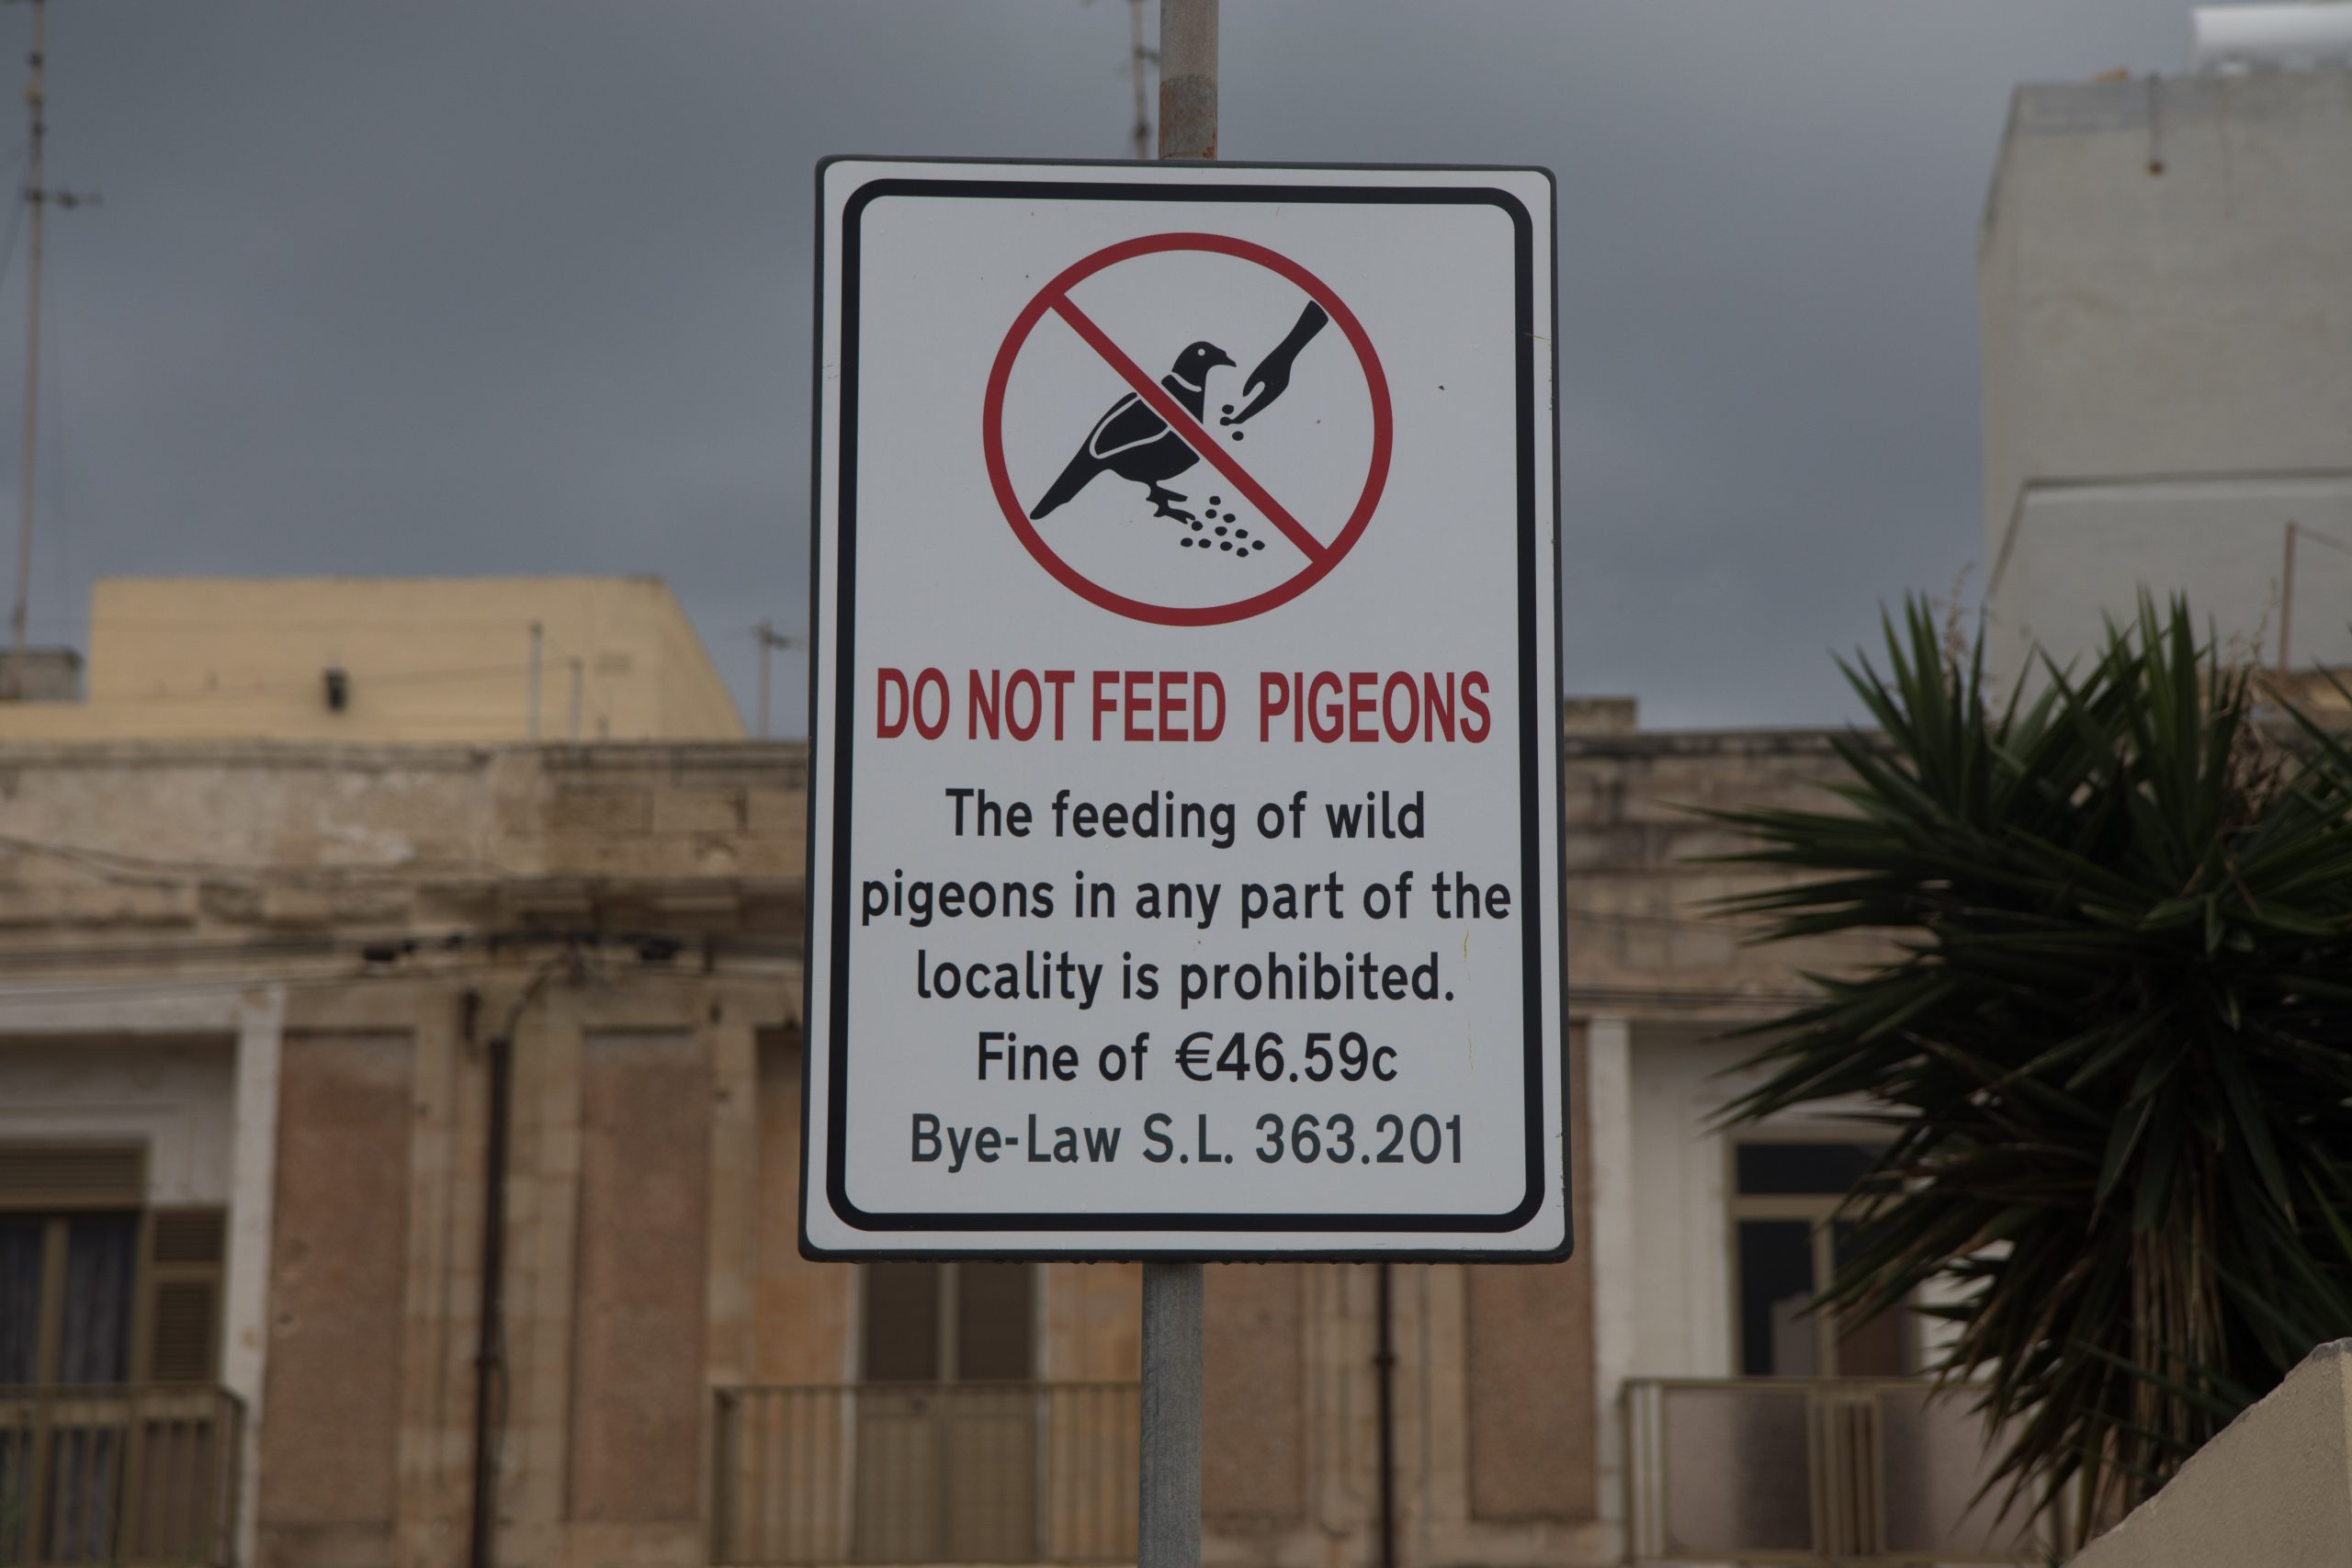 Don't feed the pigeons.